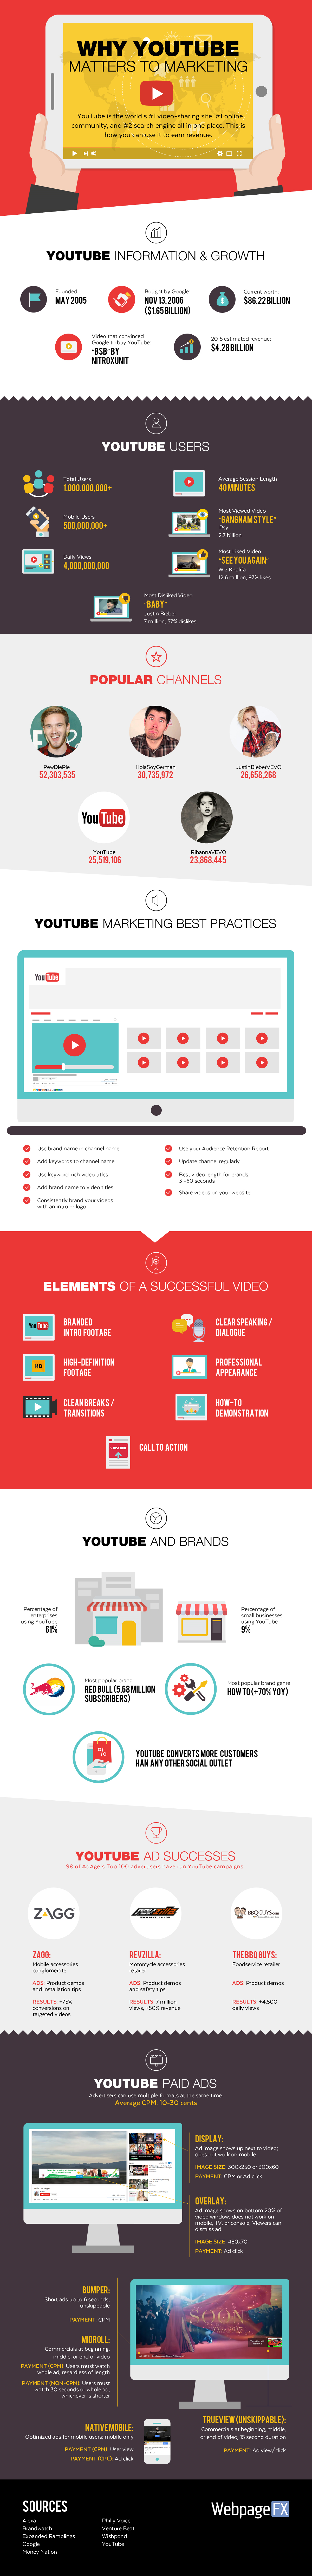 Why You Should Market on YouTube [Infographic]